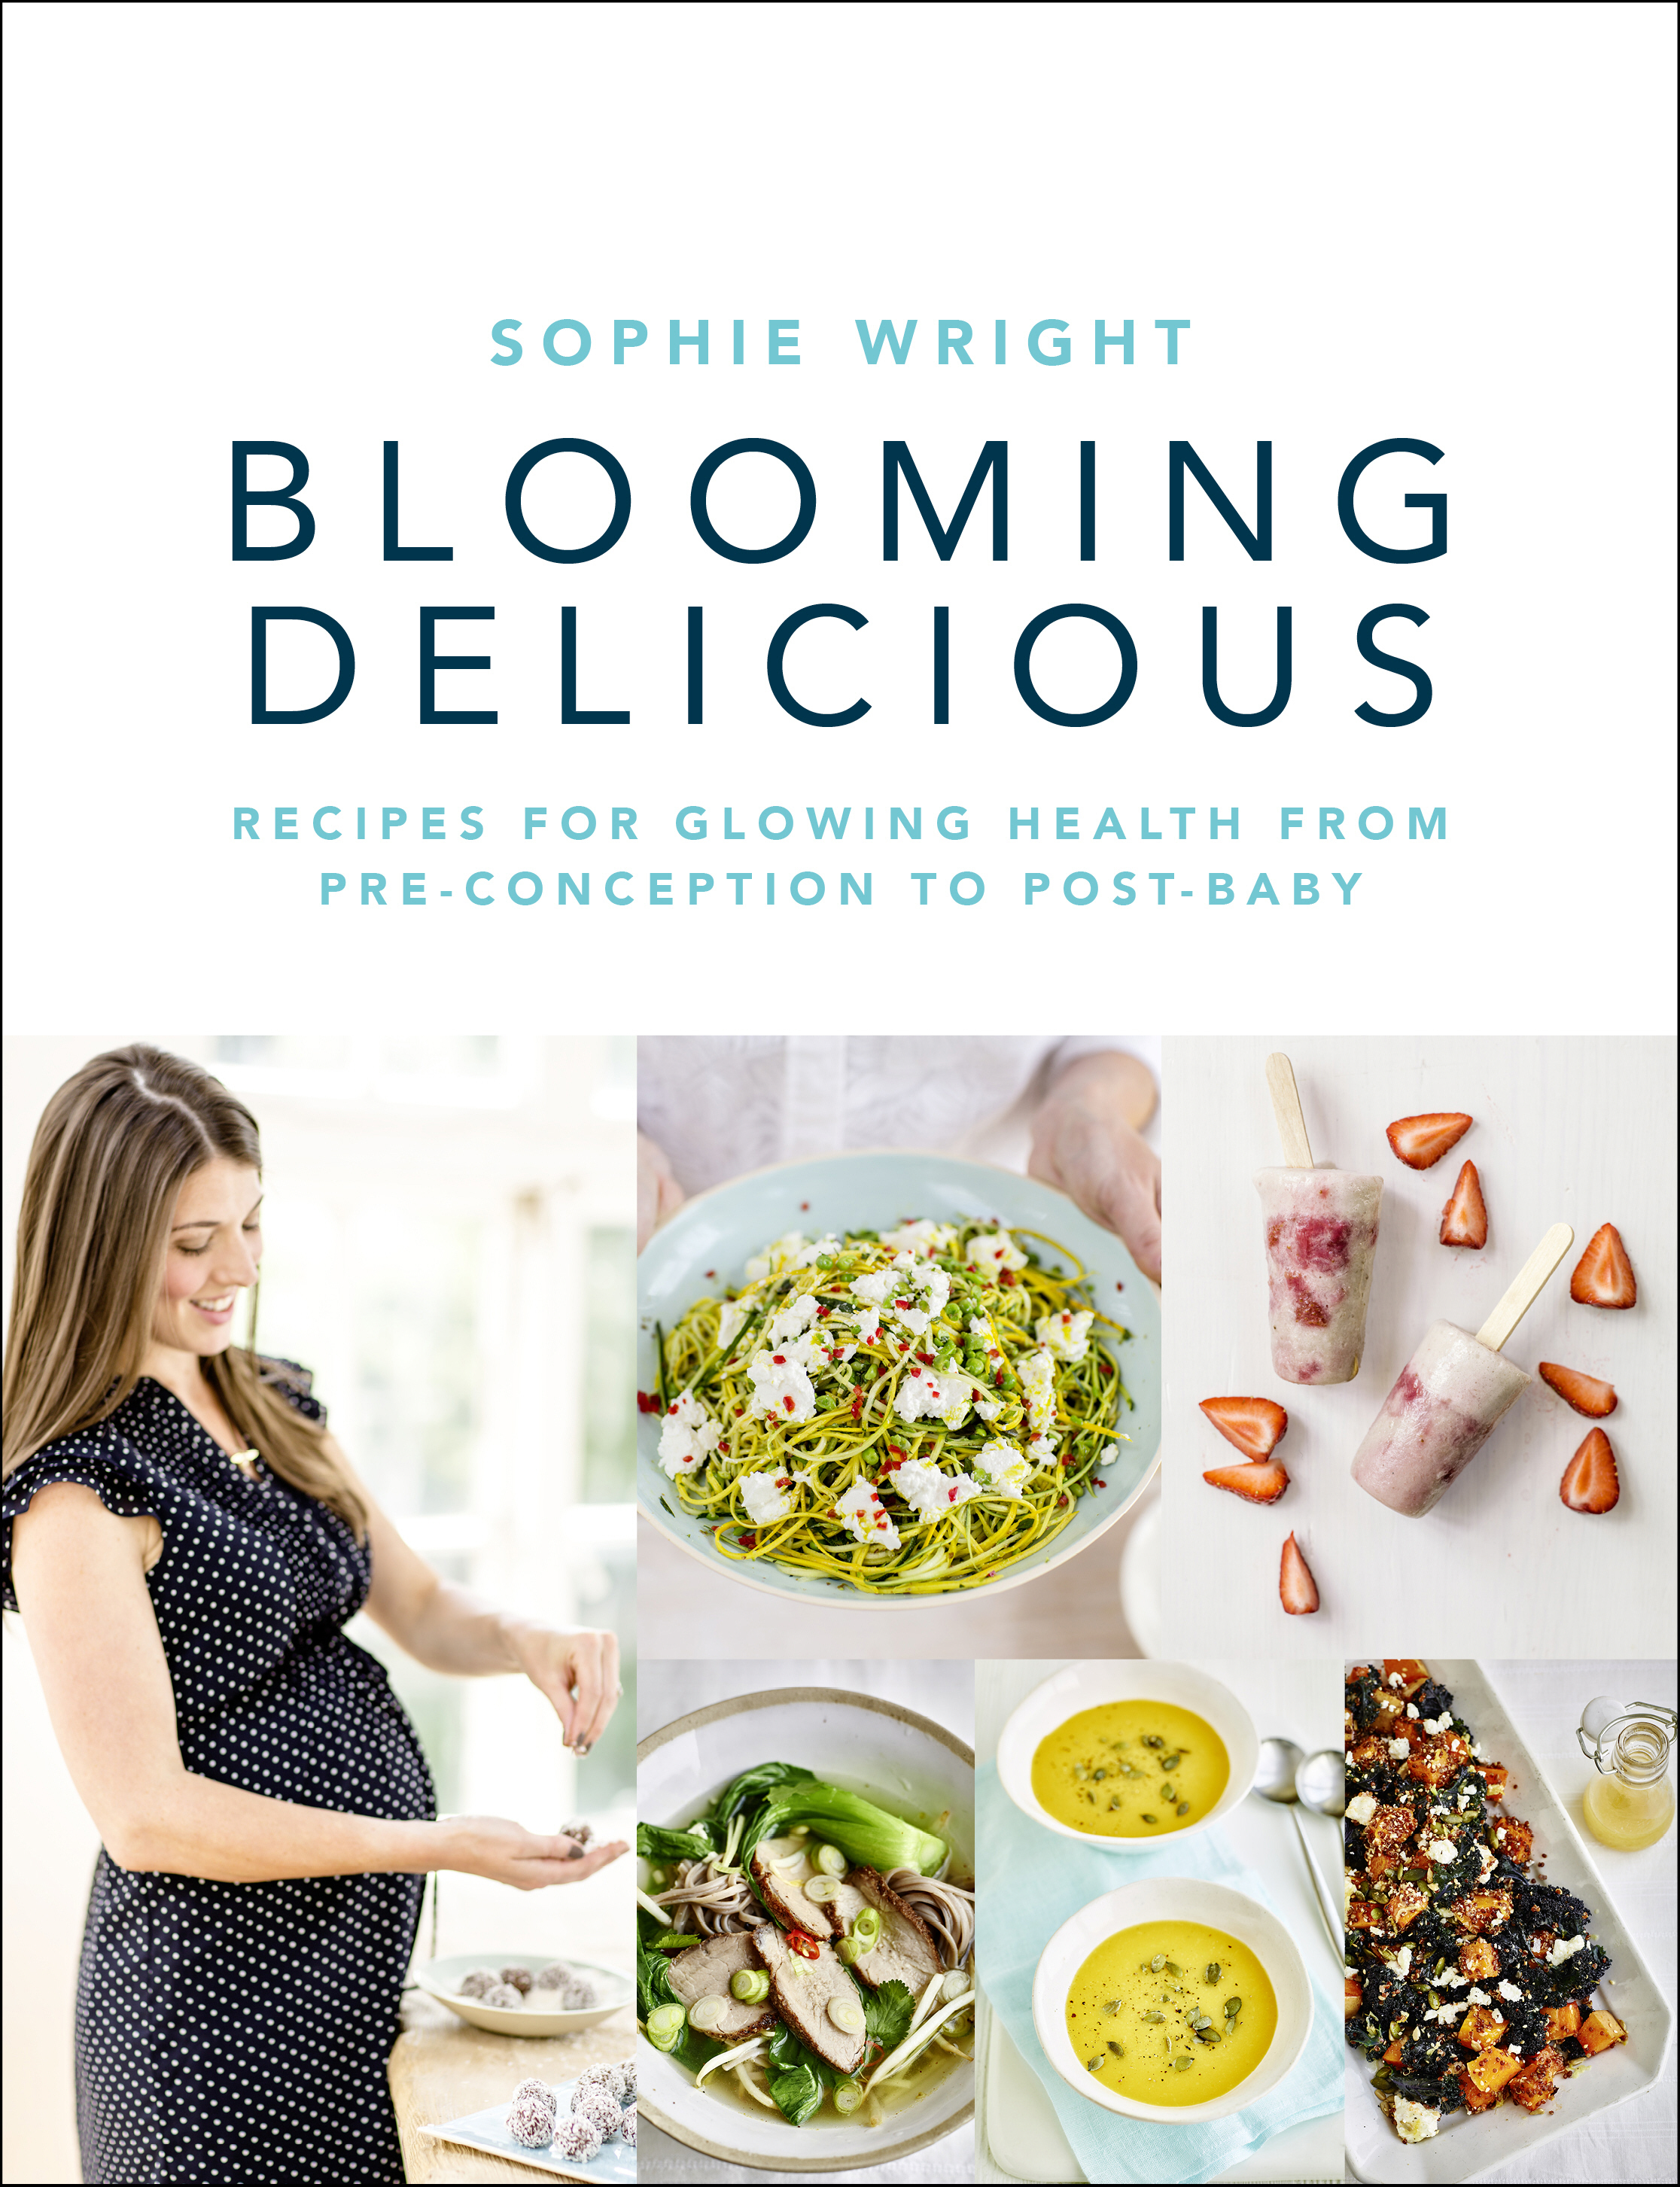 Blooming Delicious by Sophie Wright